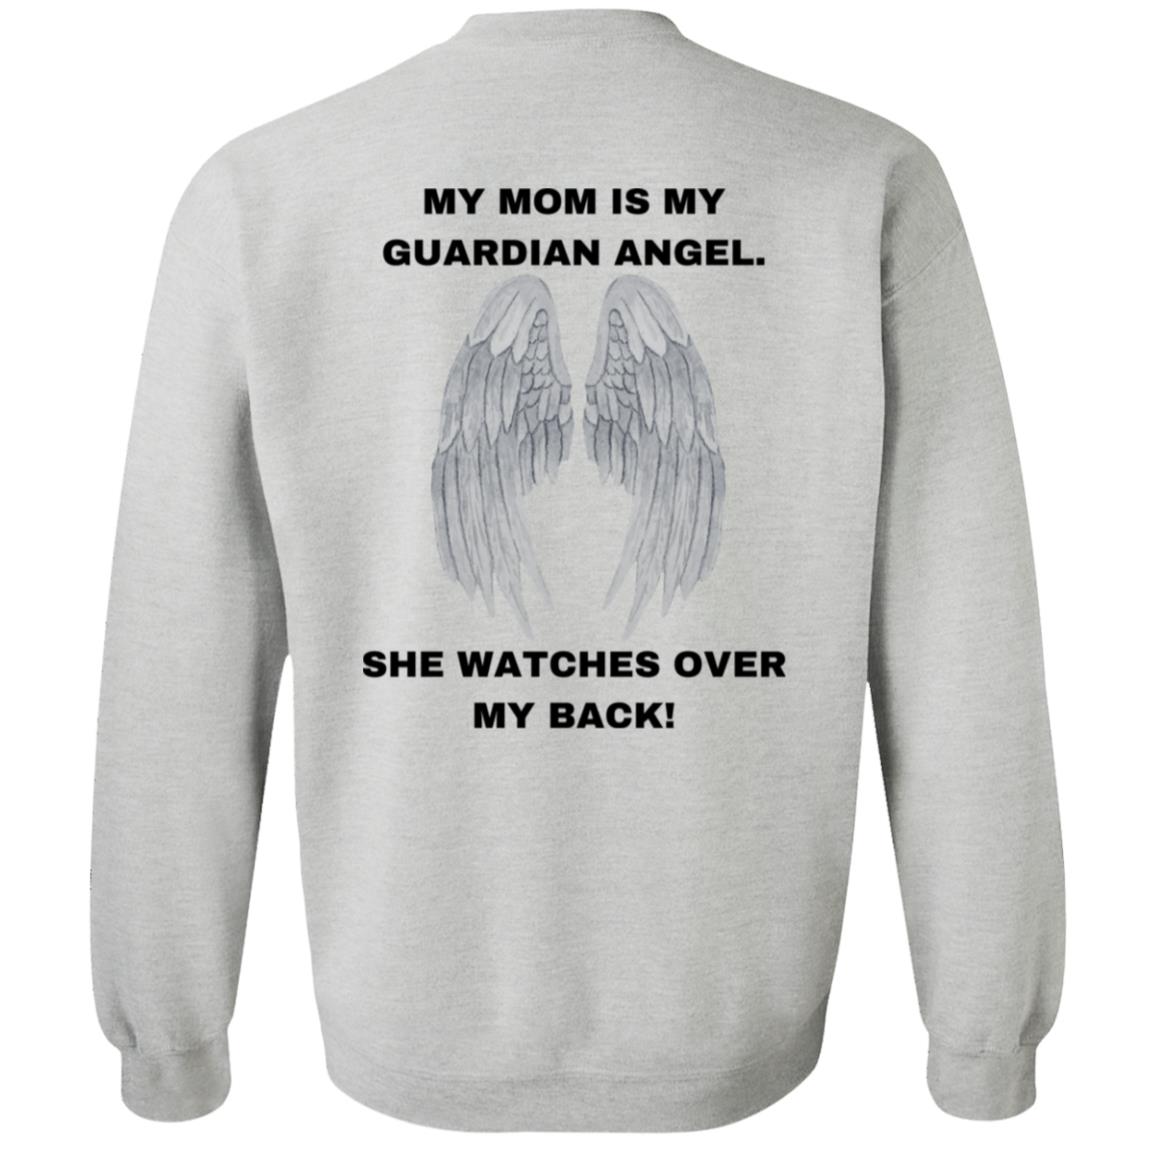 Get trendy with My Mom is MY Guardian Angel Black text (10) G180 Crewneck Pullover Sweatshirt - Sweatshirts available at Good Gift Company. Grab yours for $29.88 today!